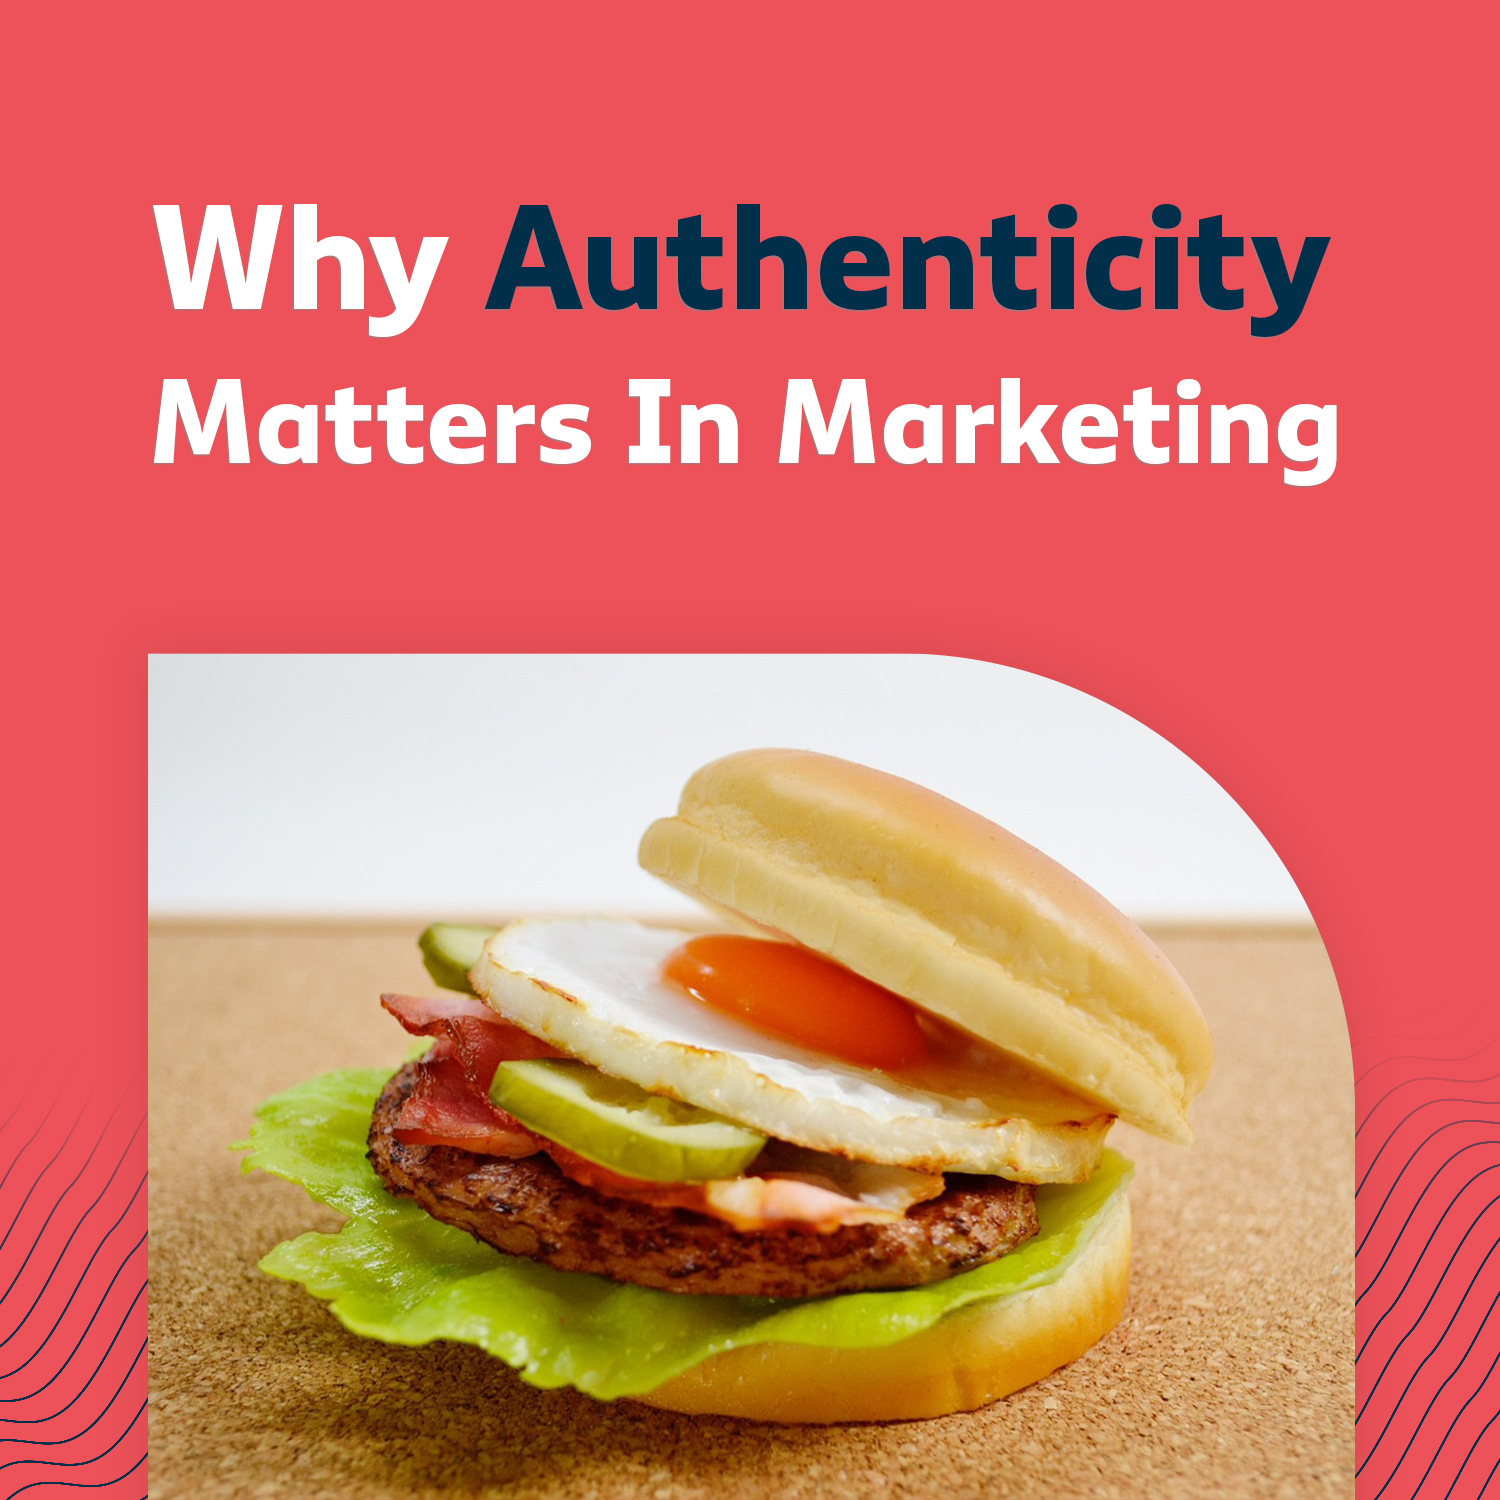 Authenticity In Marketing